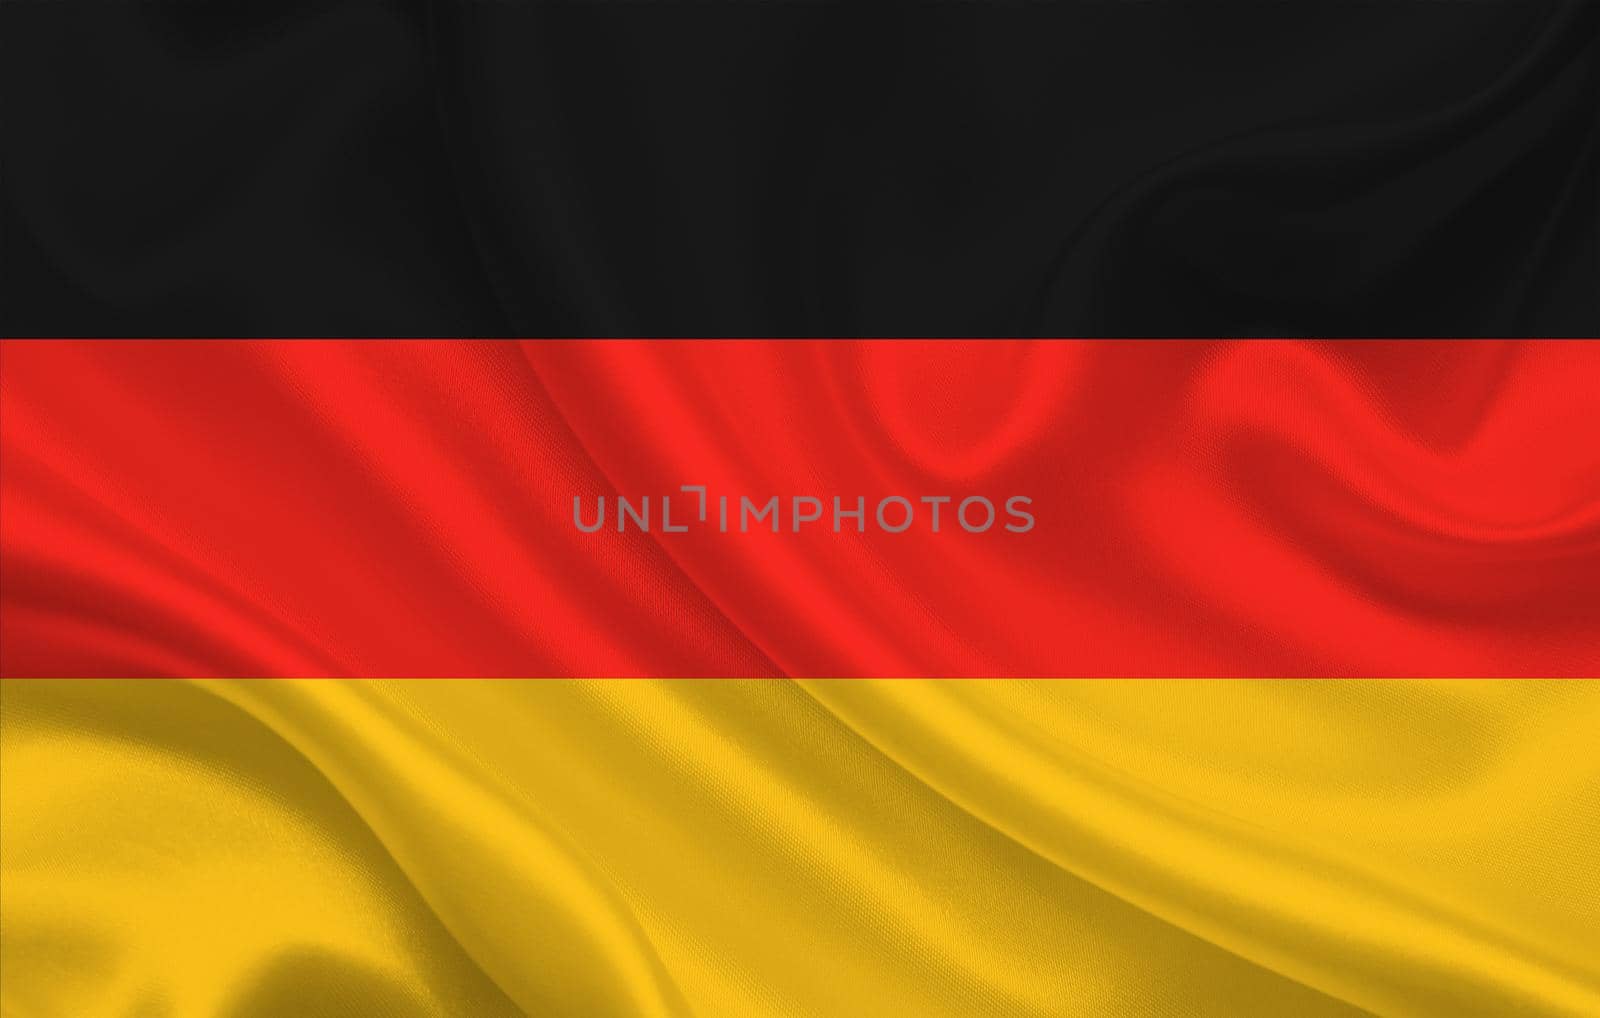 Flag of Germany country on wavy silk fabric background panorama - illustration